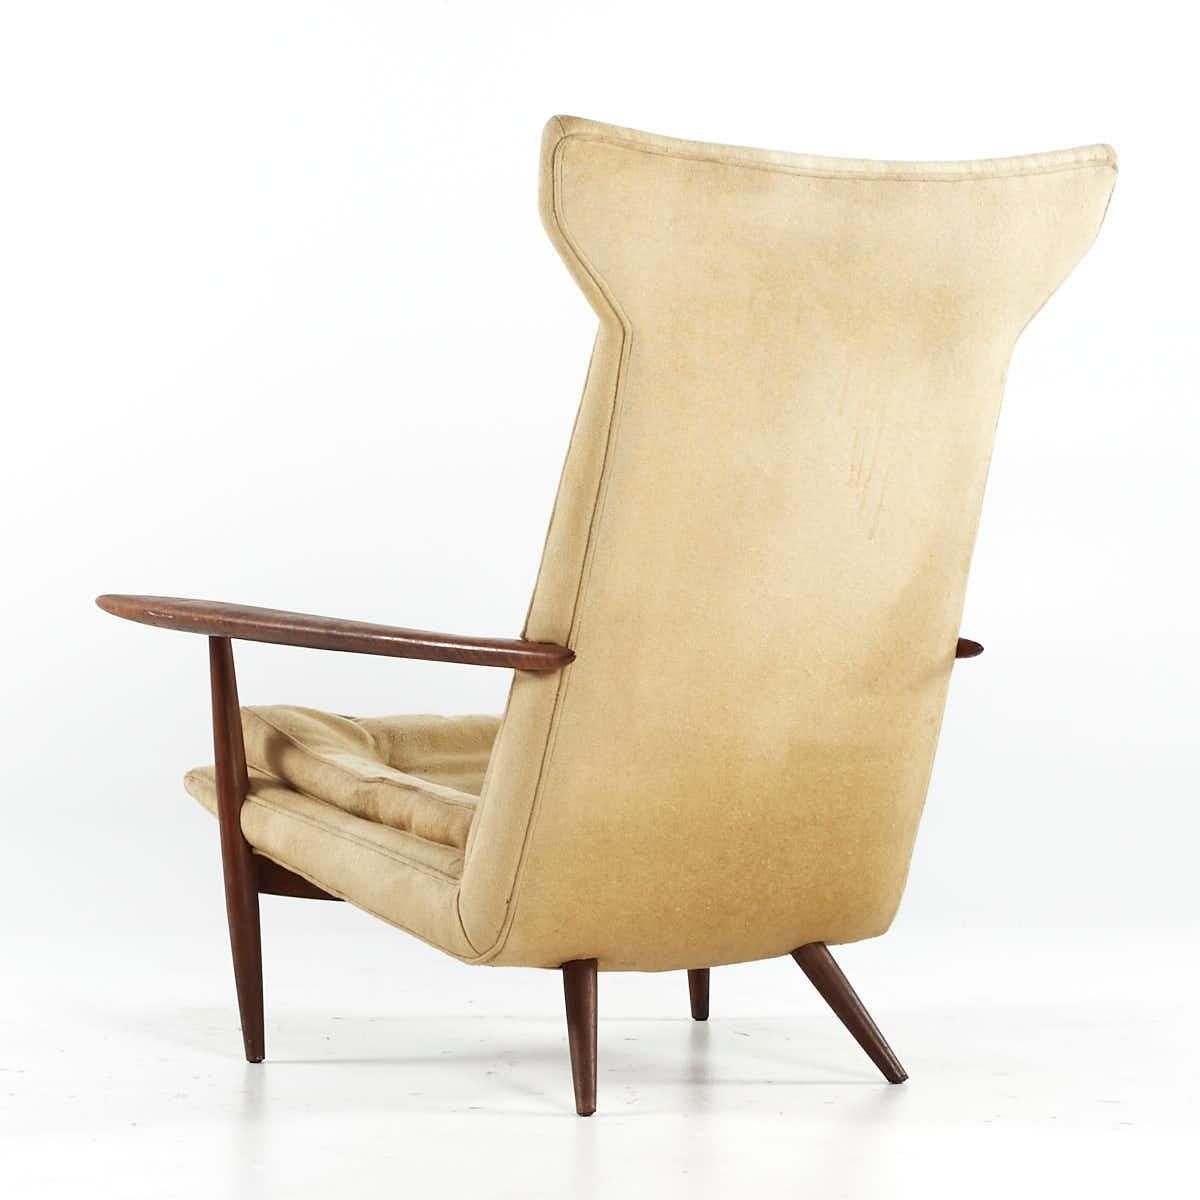 Late 20th Century George Nakashima for Widdicomb Mid Century #257 W Wing Back Lounge Chair For Sale